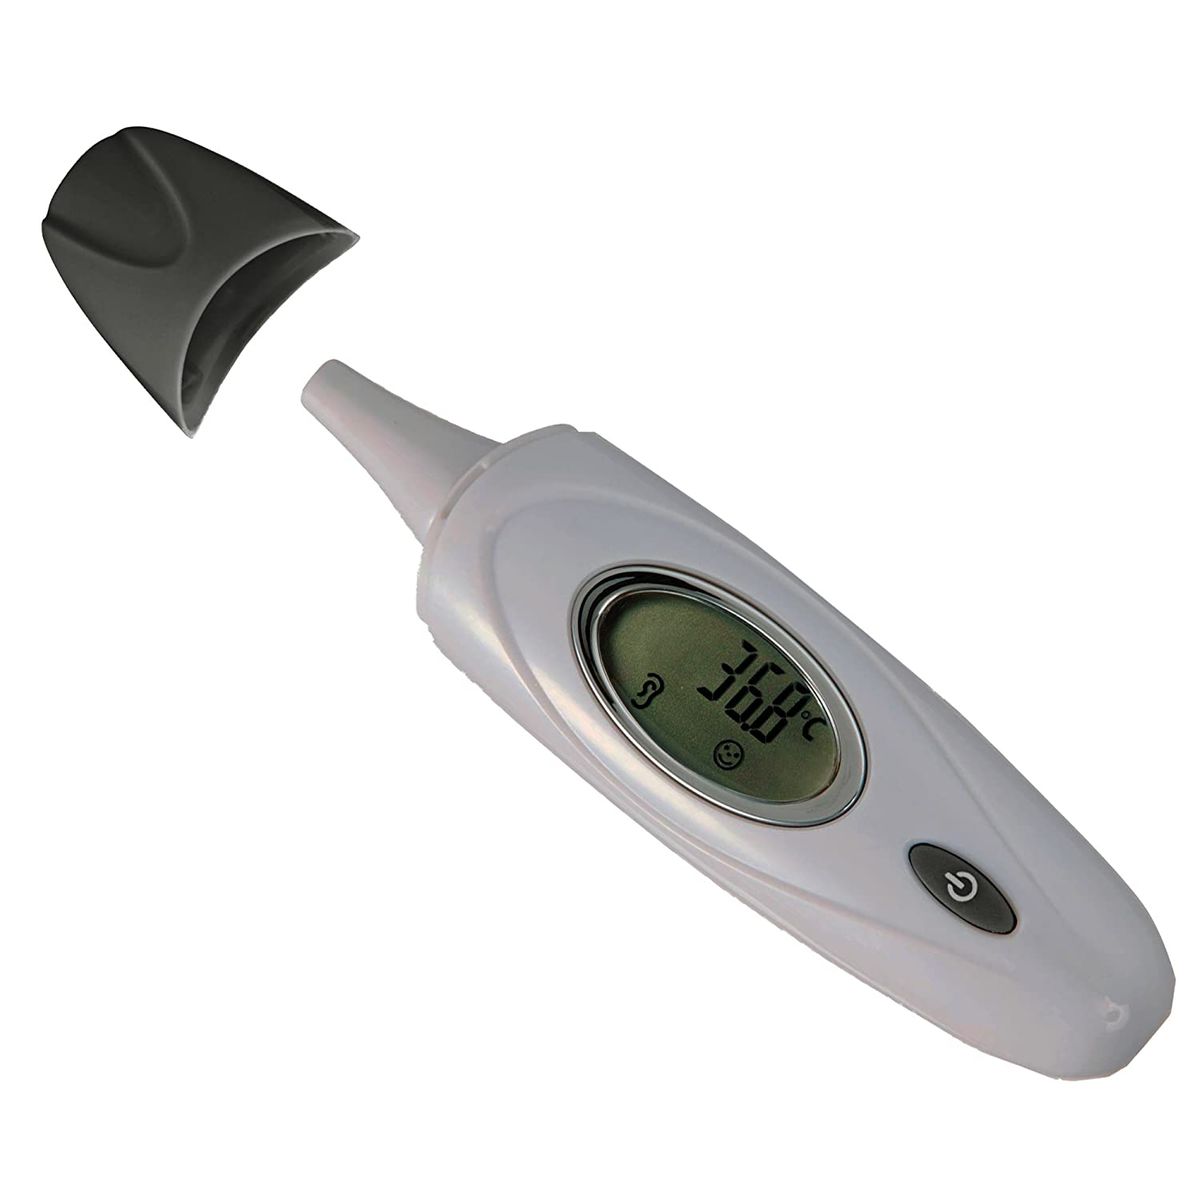 Reer 98020 SkinTemp 3in1 Infrared Fever Thermometer